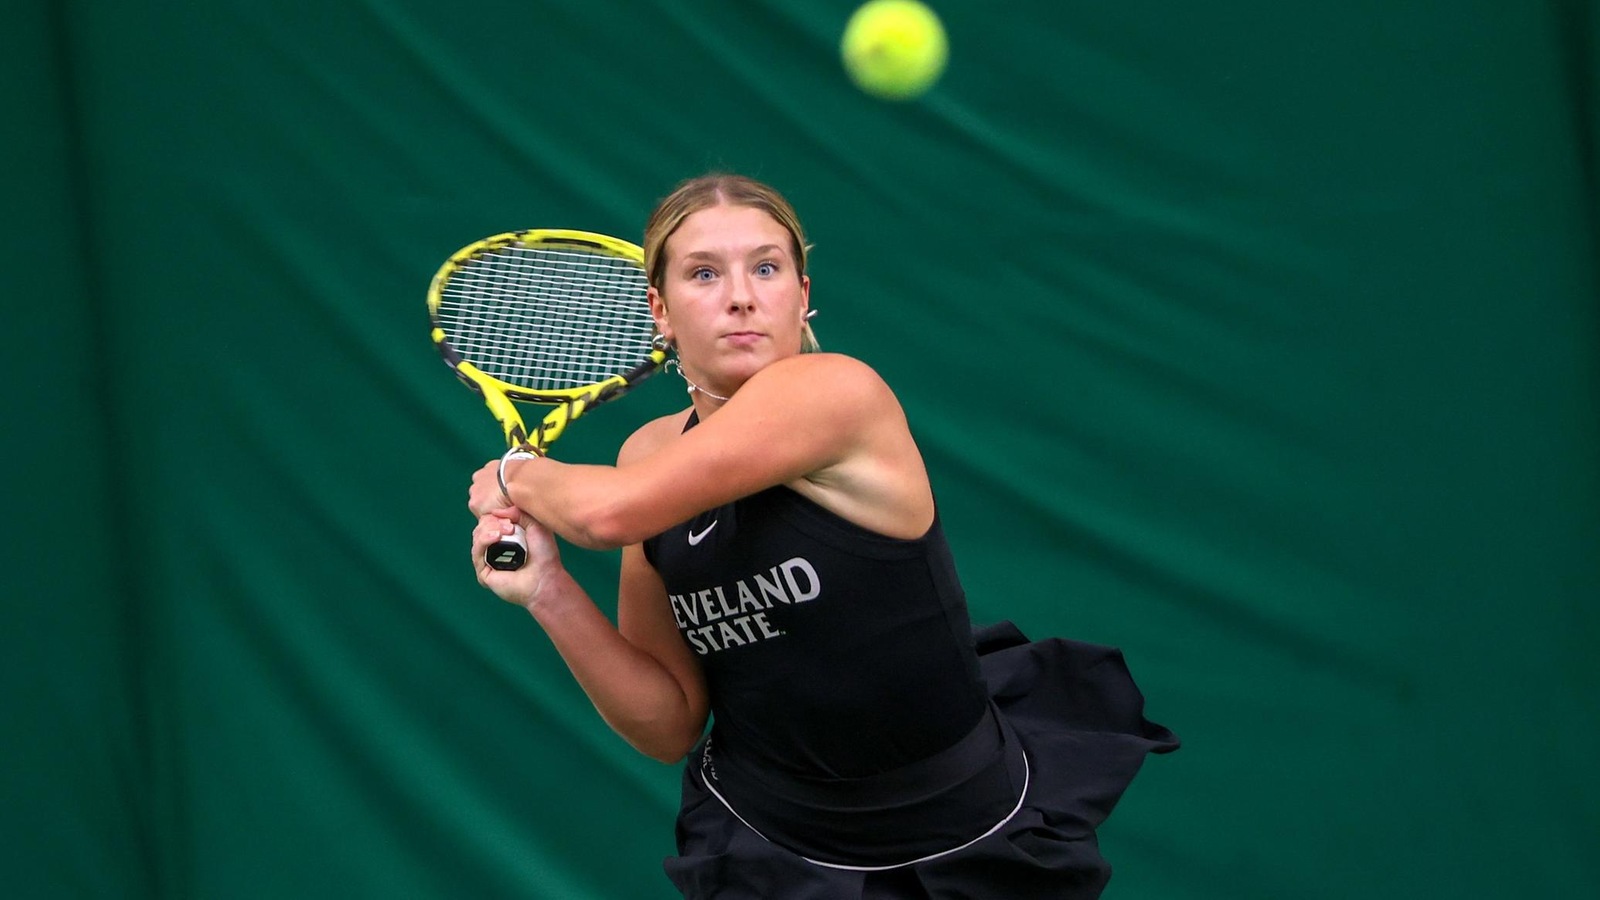 Cleveland State Women’s Tennis Comes Up Short Against Ball State, 5-2